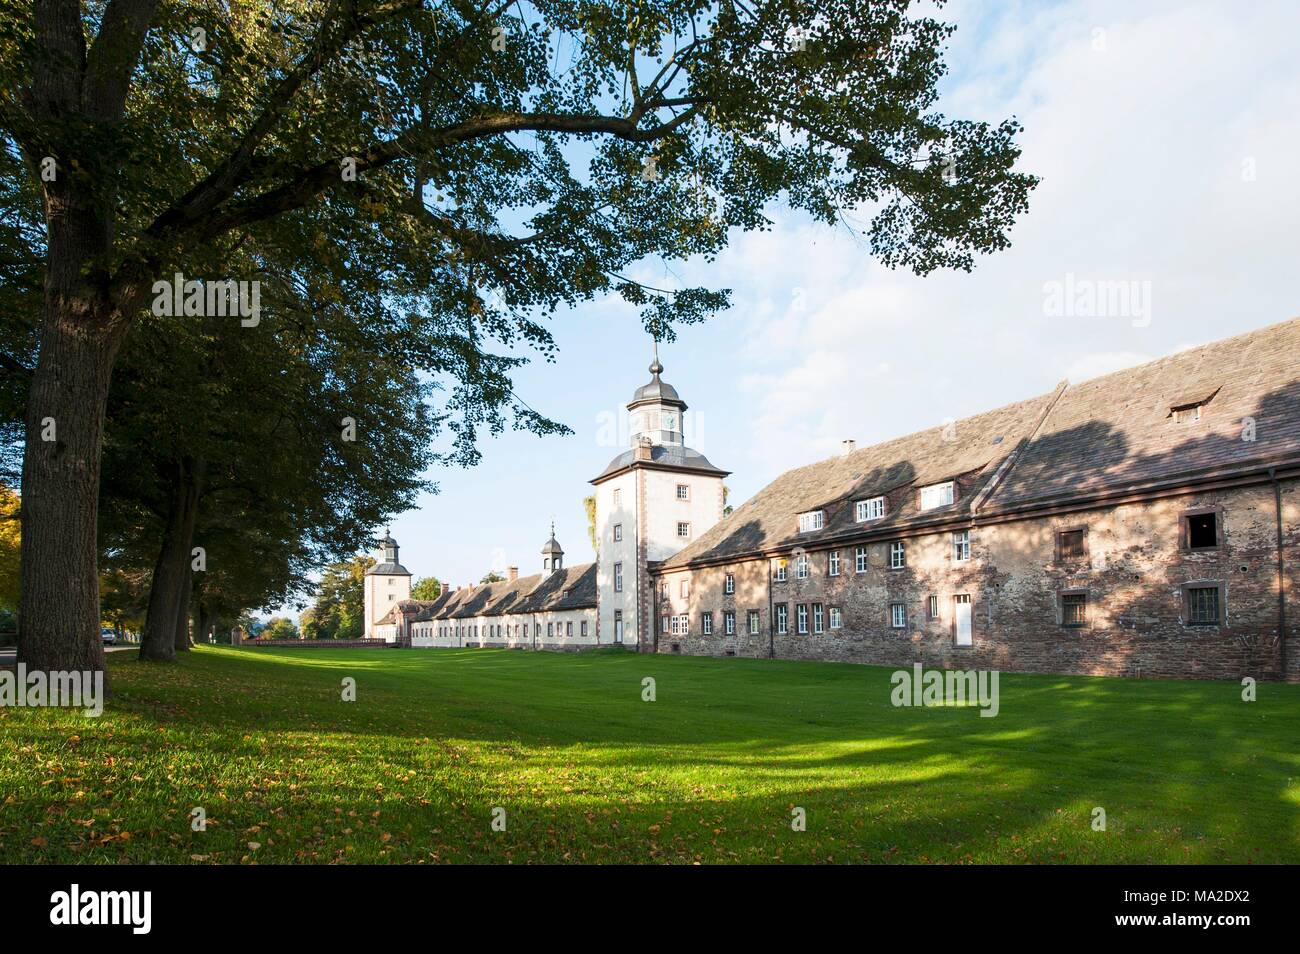 Schloss Corvey – the outer bailey with towers Stock Photo